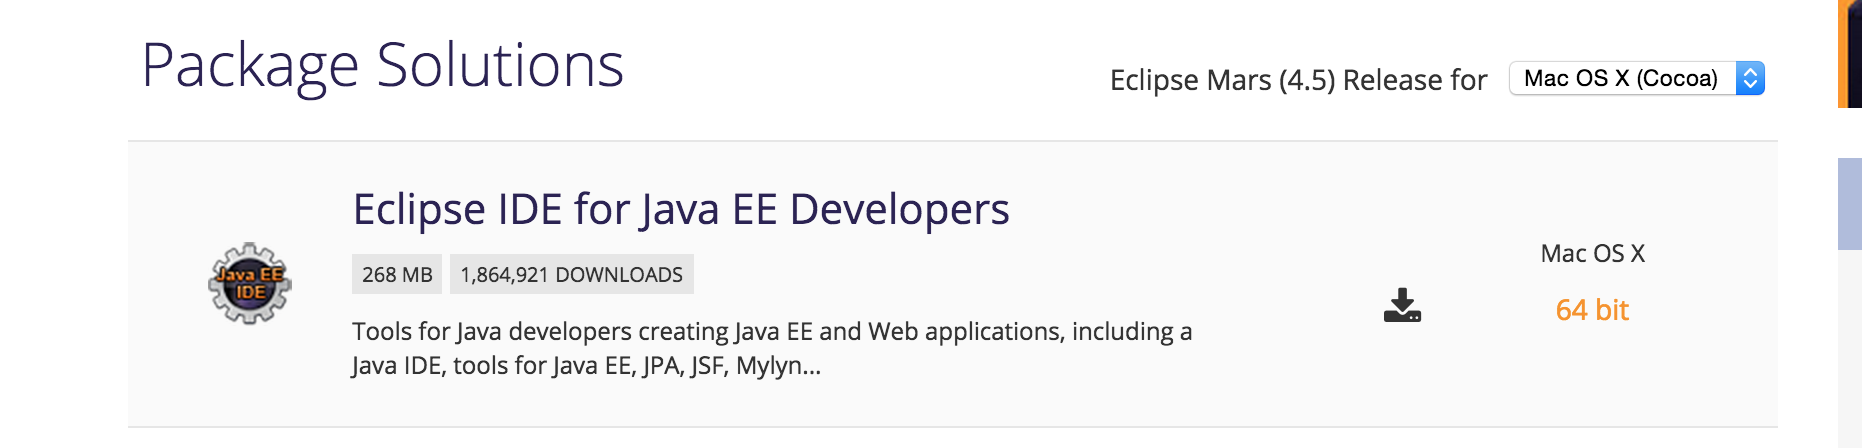 eclipse mac version 1.6.0_65 of the jvm is not suitable for this product